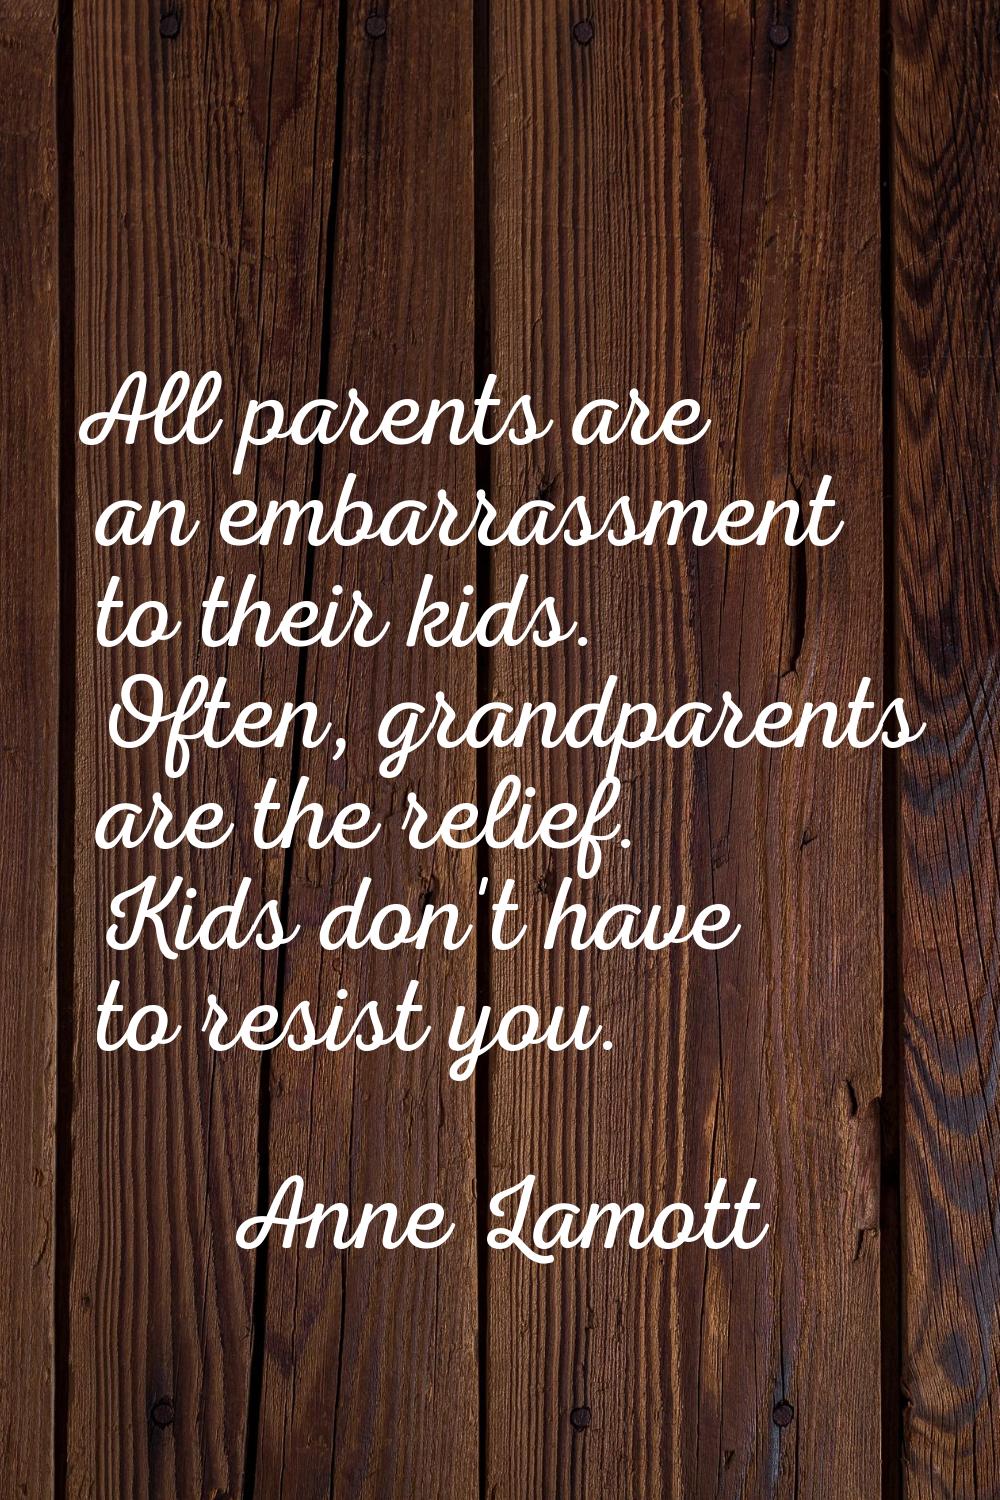 All parents are an embarrassment to their kids. Often, grandparents are the relief. Kids don't have